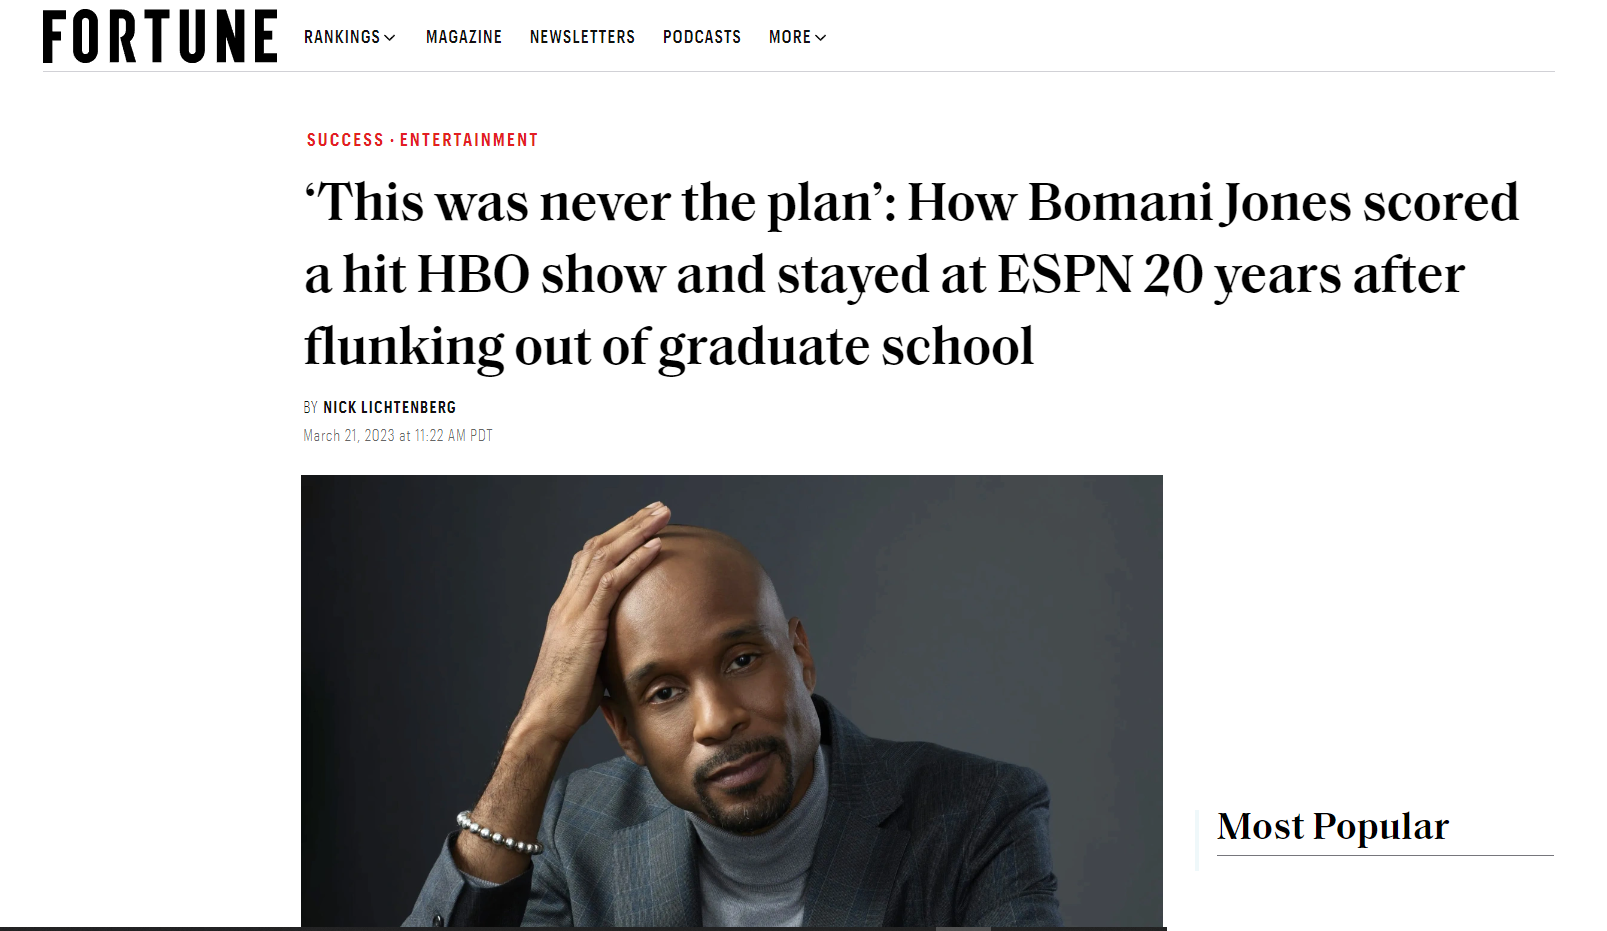 FORTUNE: How Bomani Jones scored a hit HBO show and stayed at ESPN 20 years after flunking out of graduate school